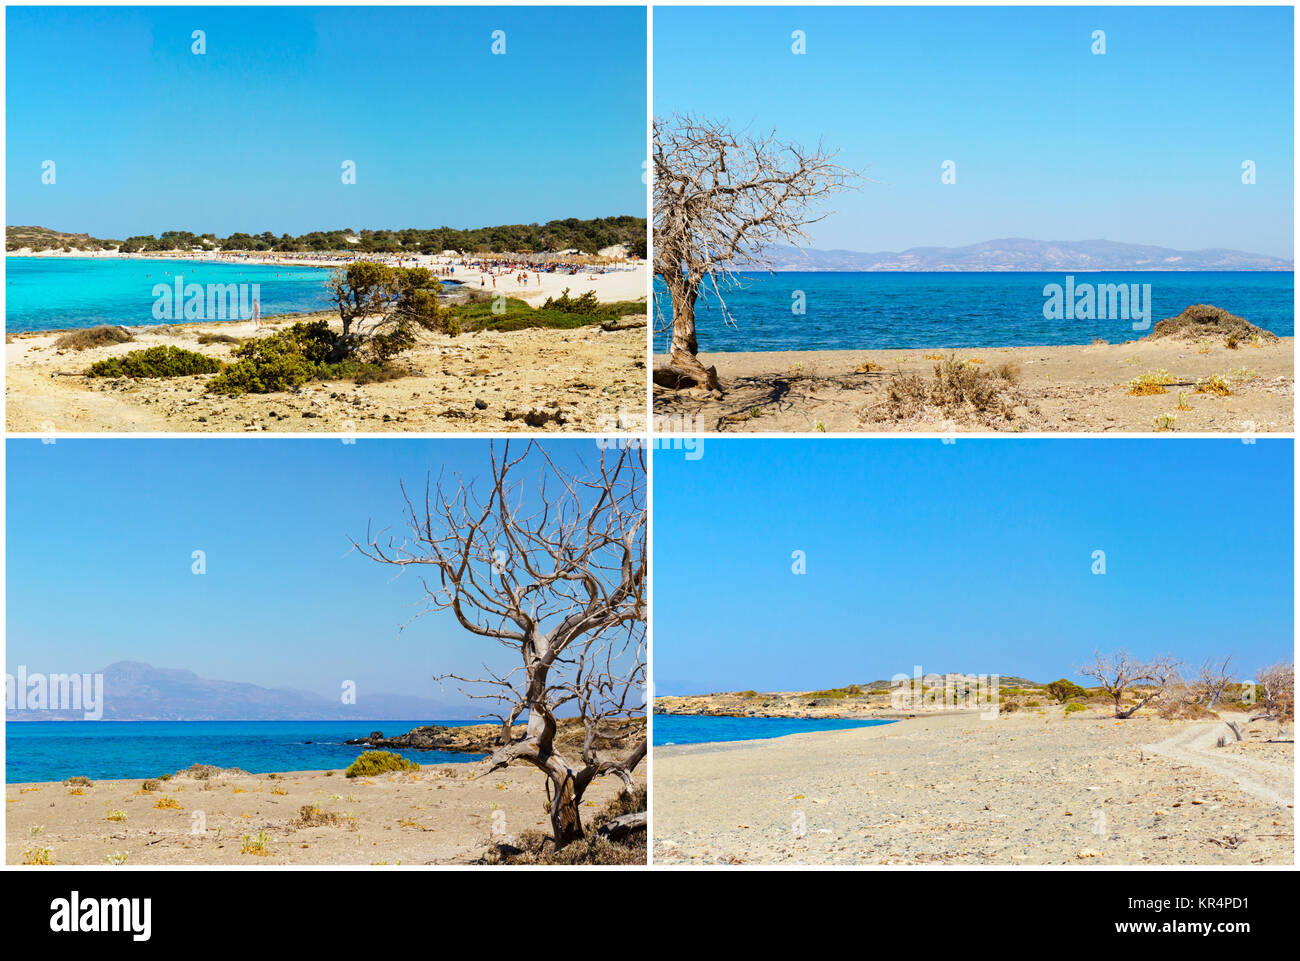 Photo collage with images of Chrissi Island, near Crete, Greece Stock Photo